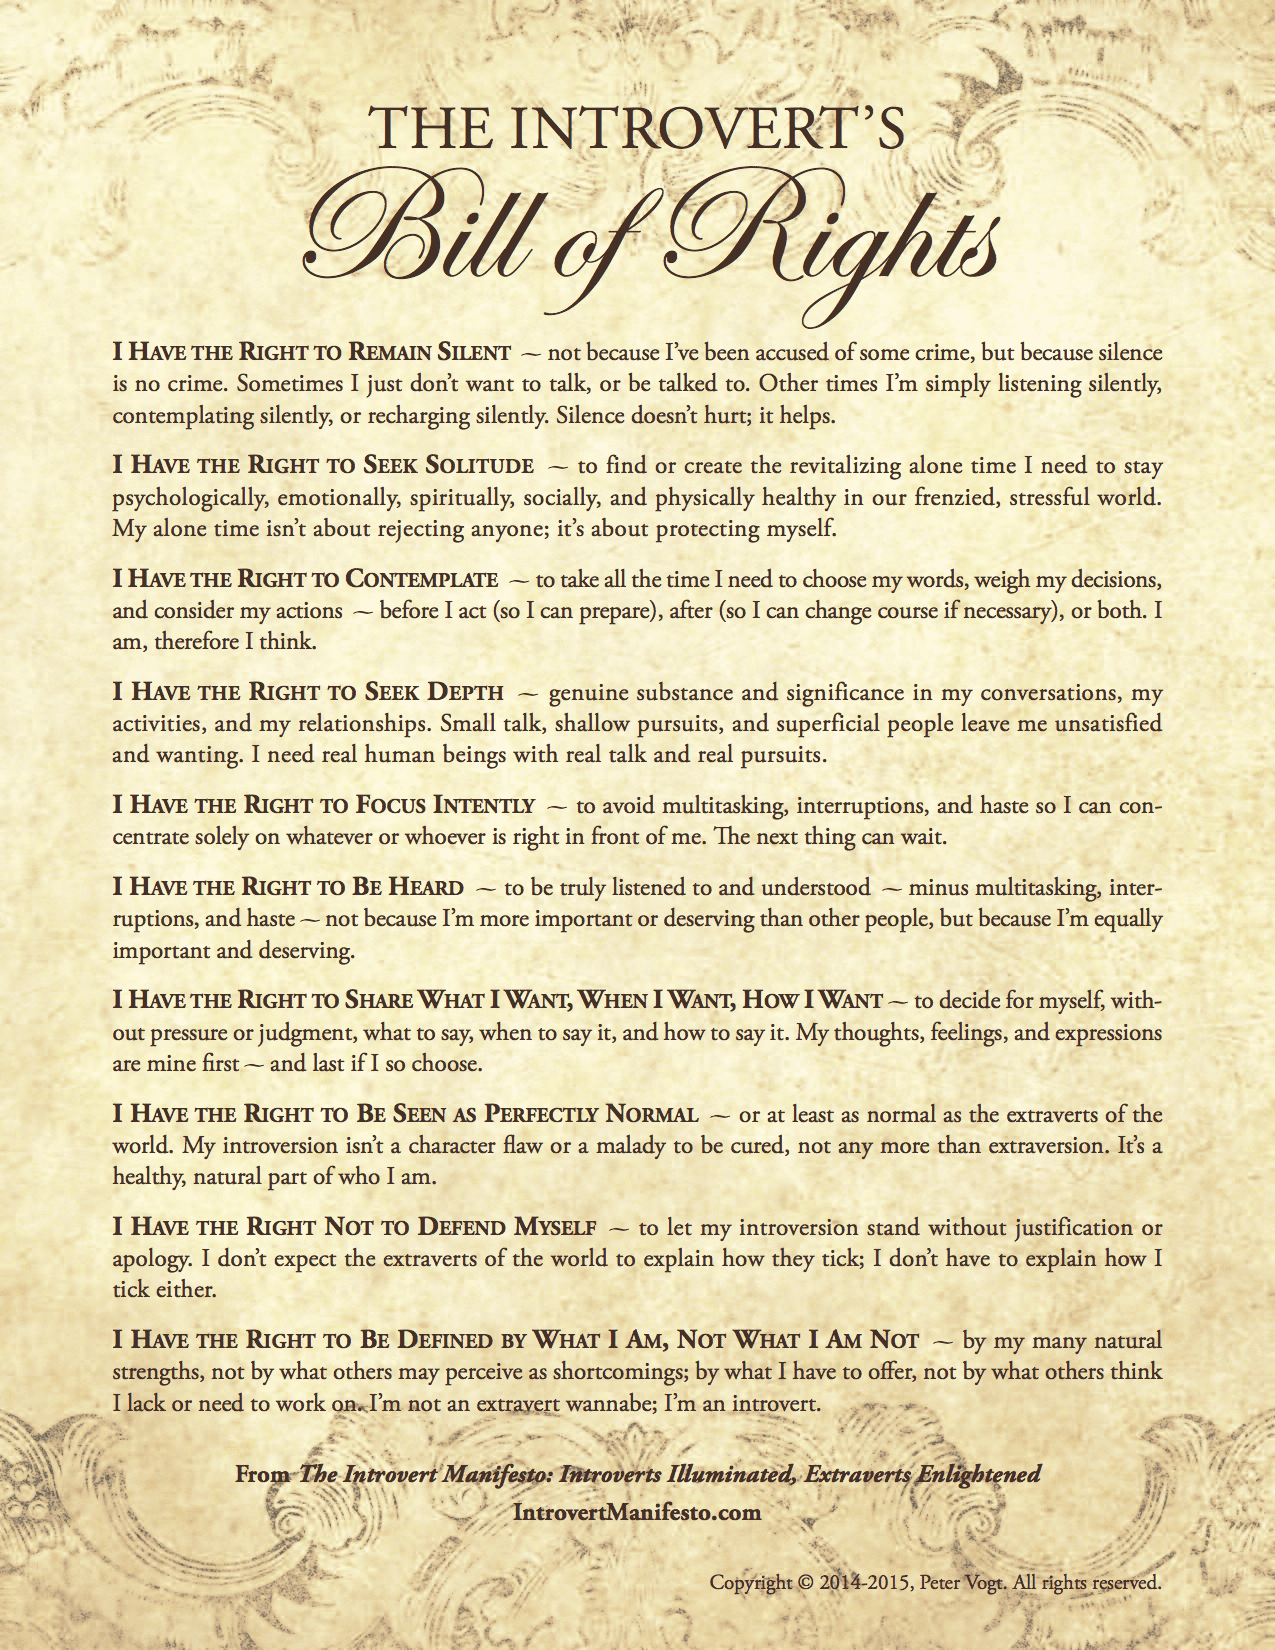 The Introvert's Bill of Rights poster.